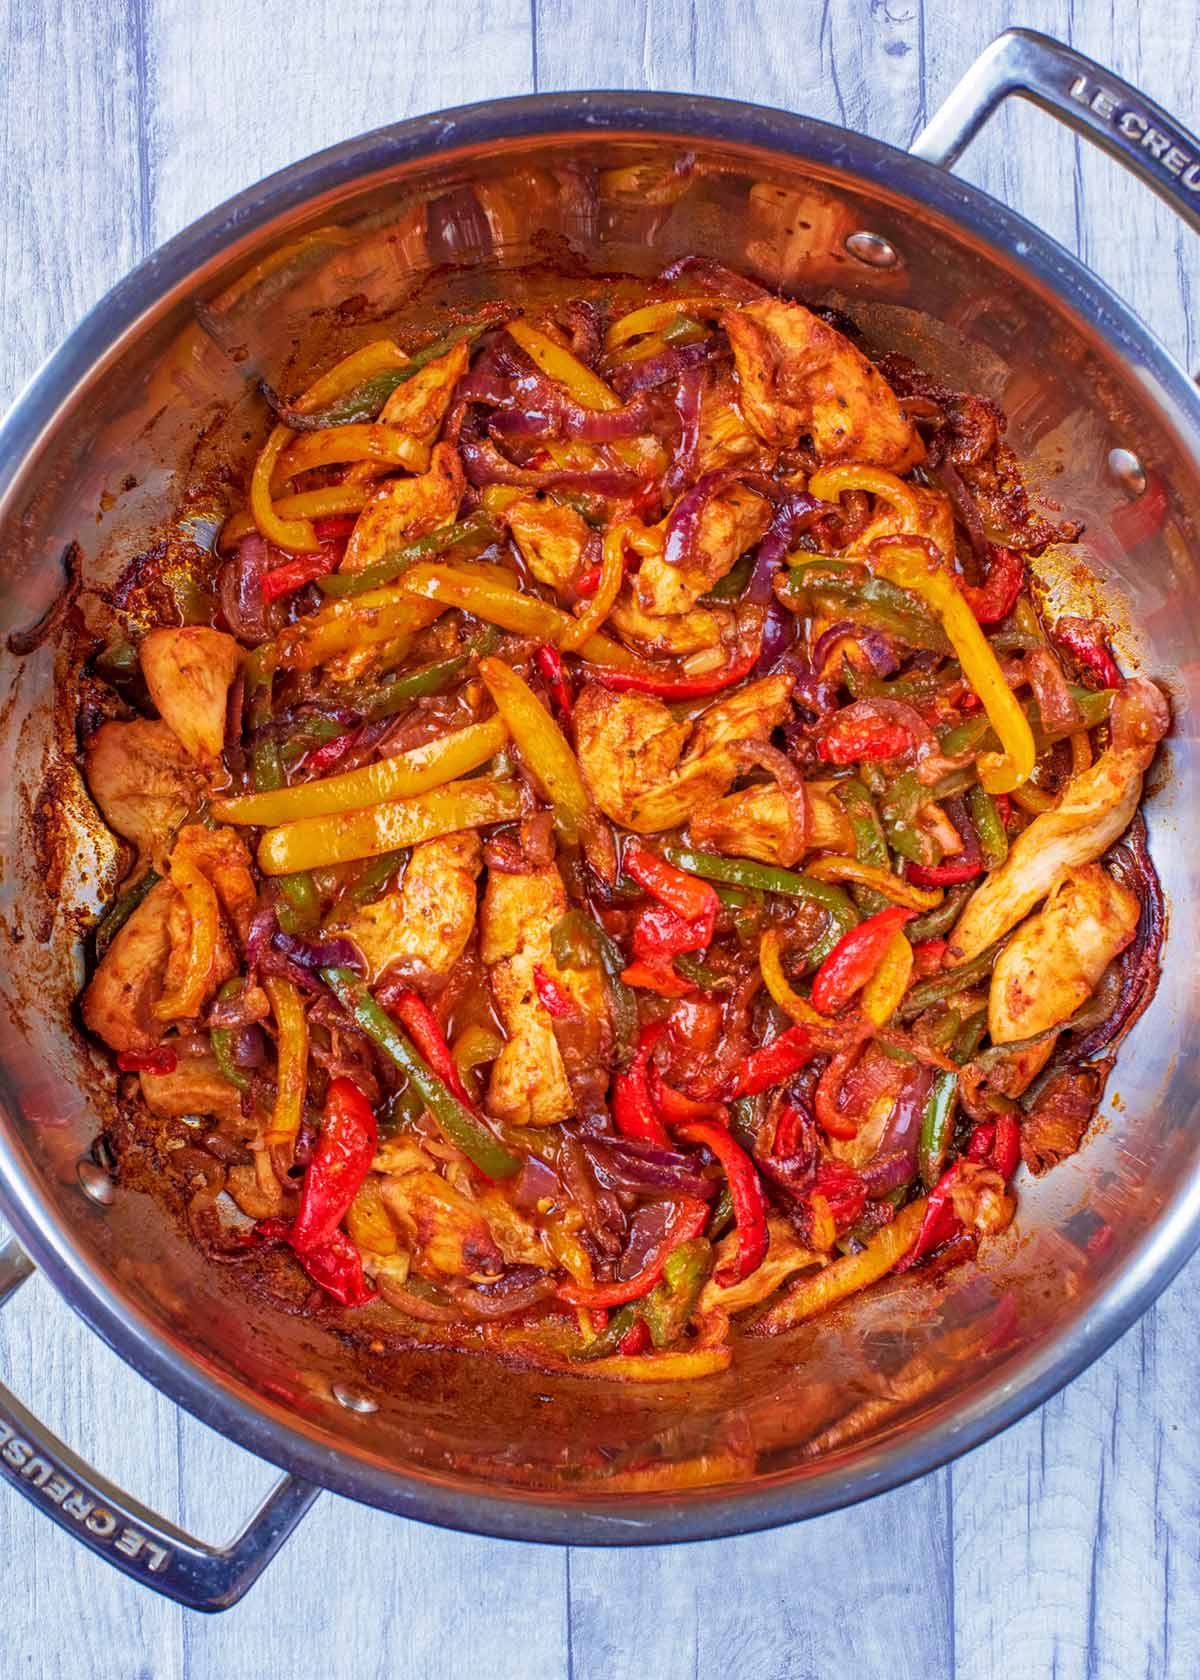 Cooked chicken, peppers and onions in a large silver pan.